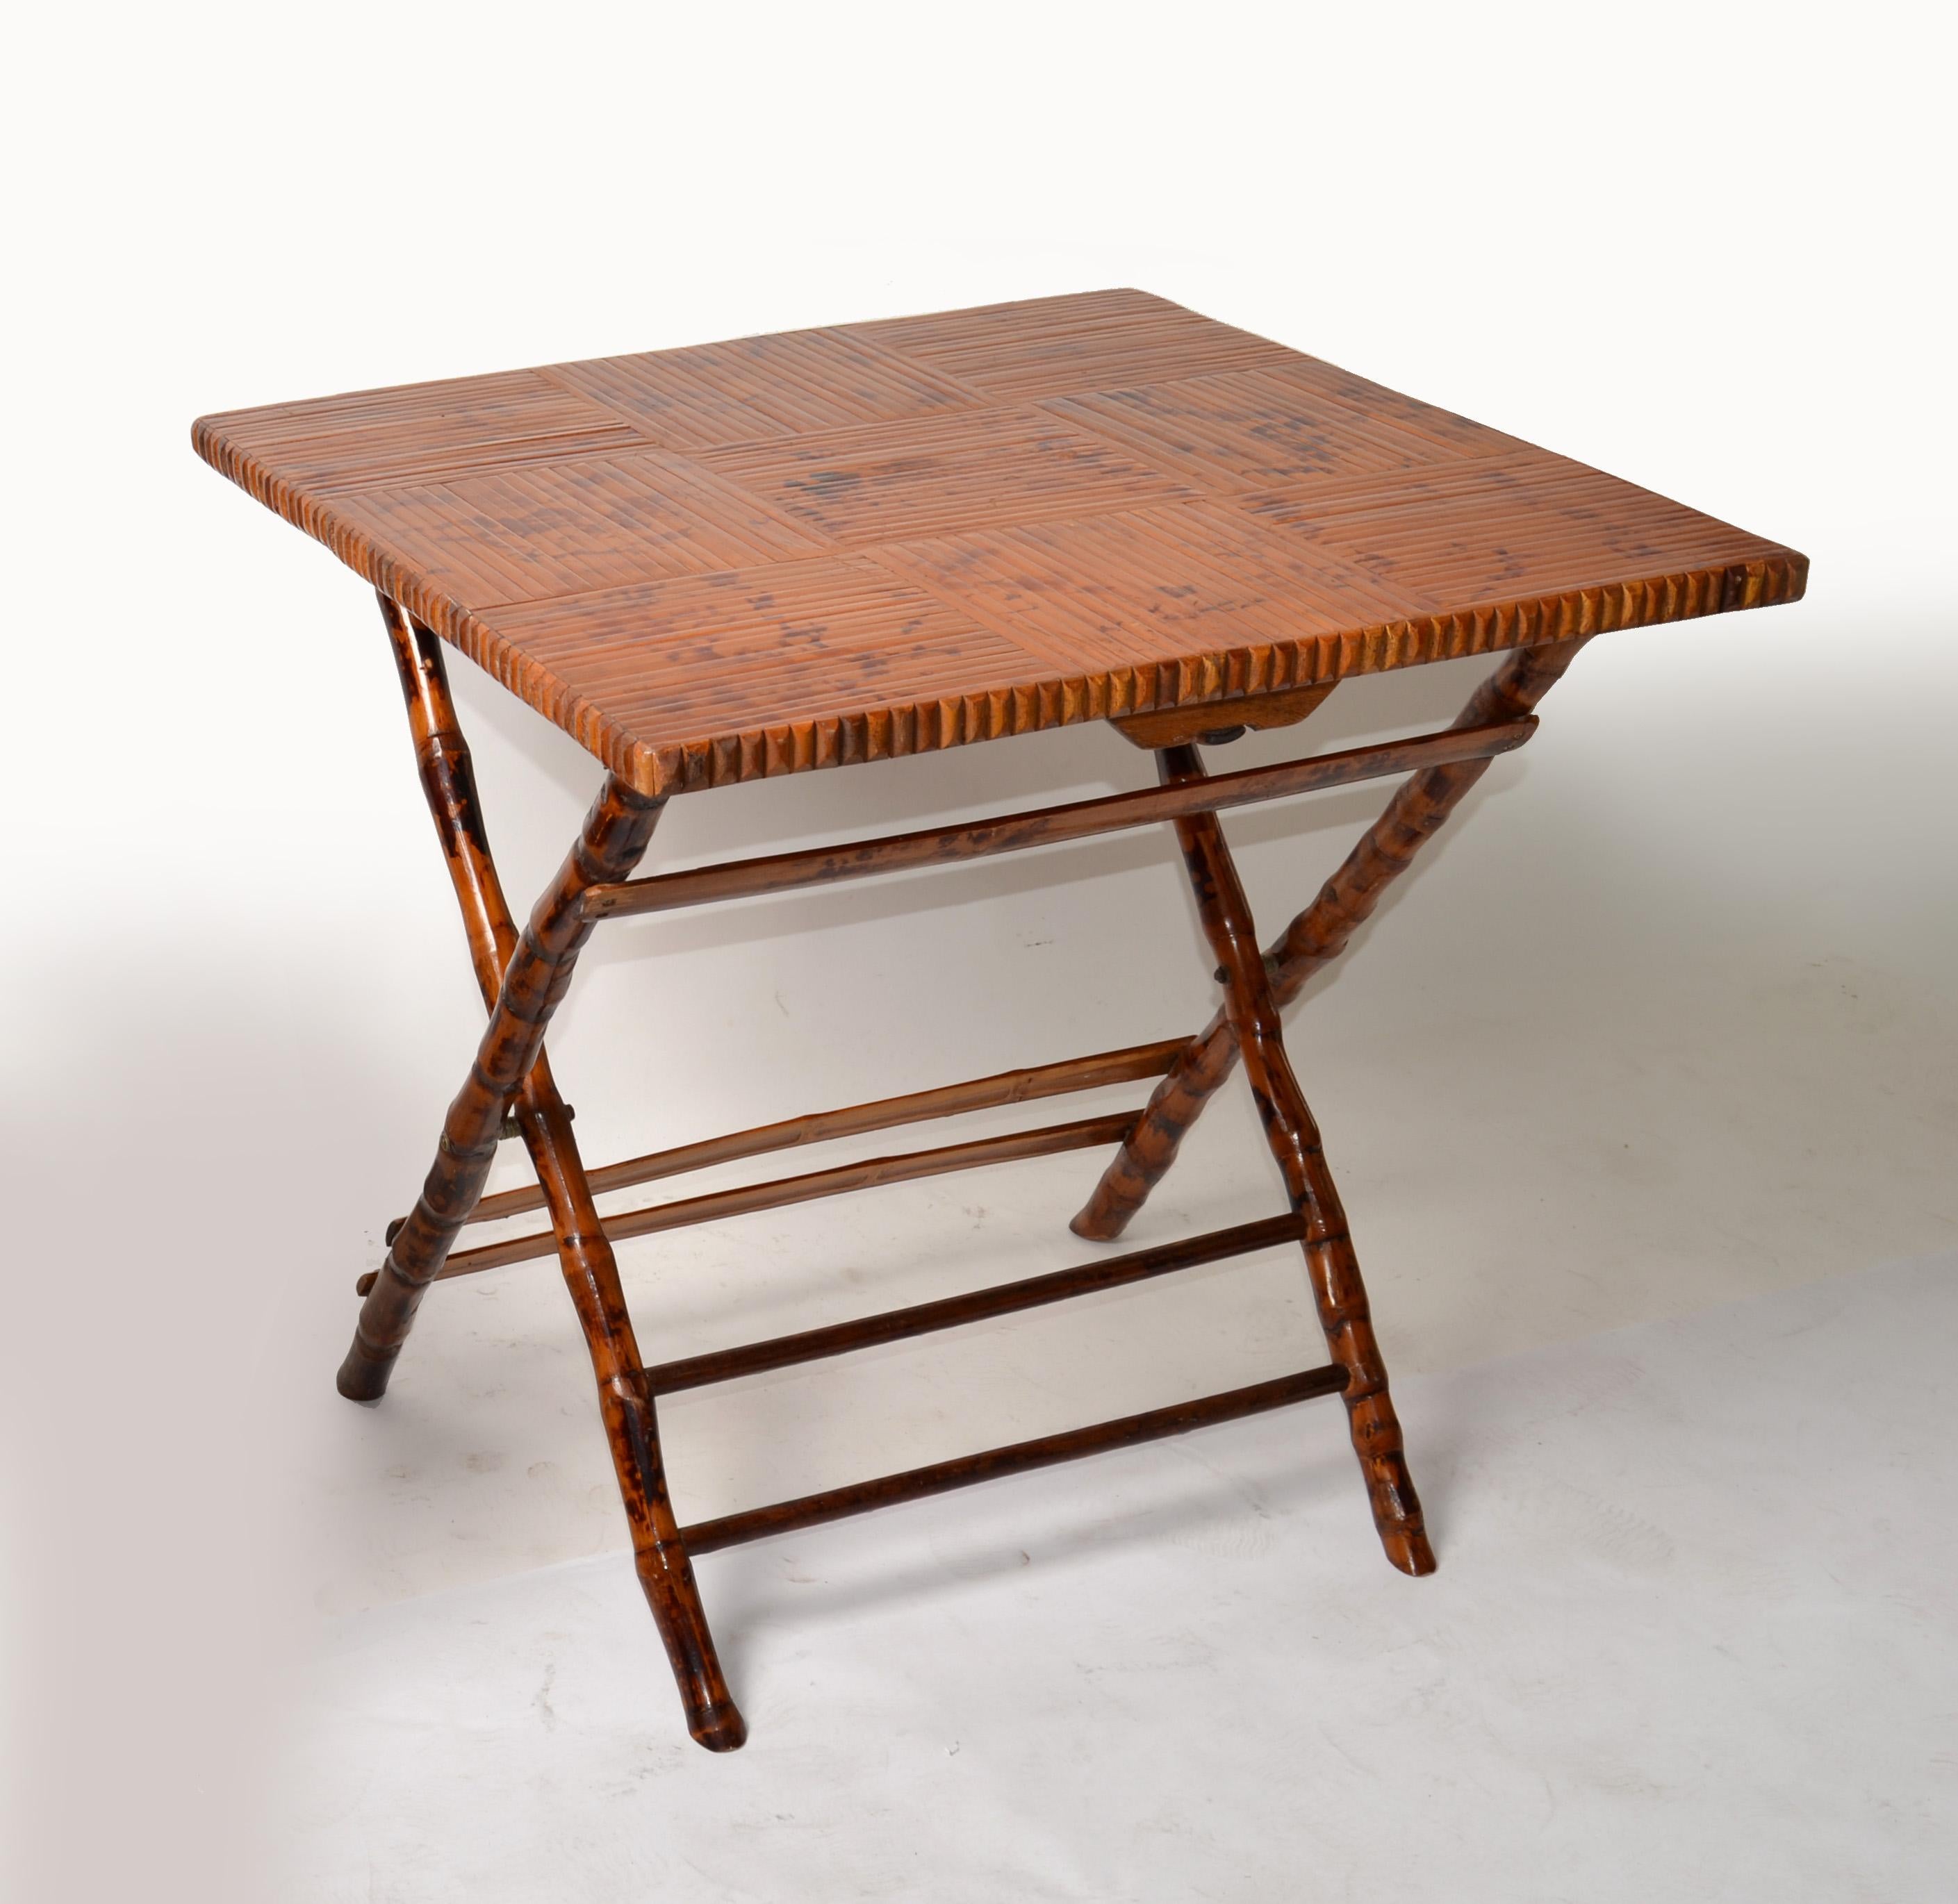 1970s Mid-Century Modern Boho Chic handcrafted square tiger bamboo Bistro, Game or Card table.
Decorative and sturdy X-base.
The table is easy to fold and uses a small storage place.
Measurements folded: 38.75 x 4 x 28 inches.
In good vintage